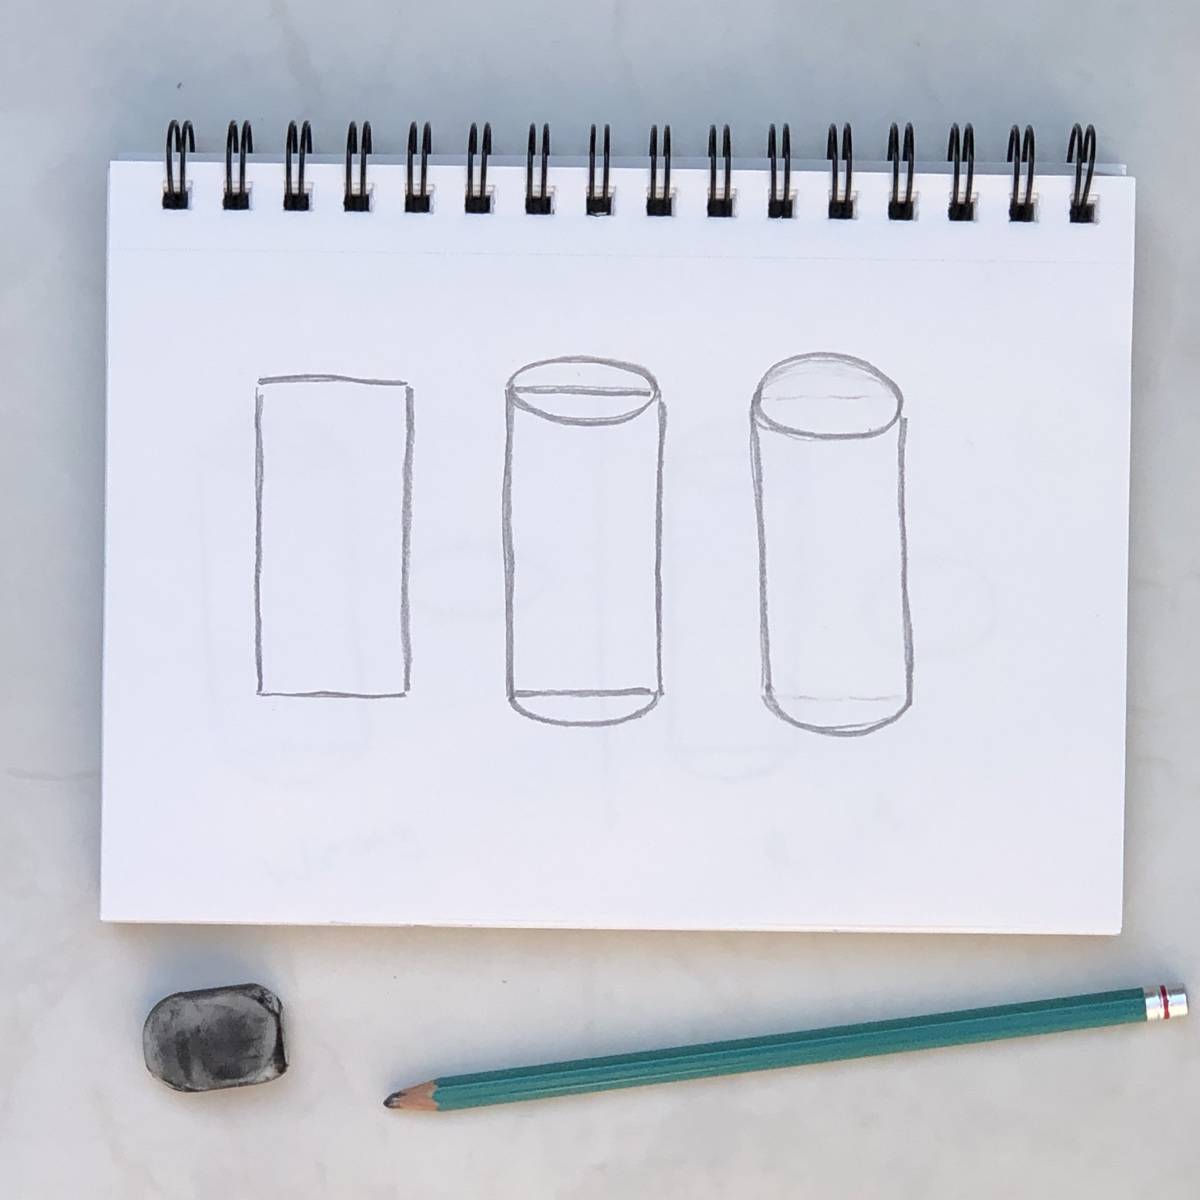 Drawing cylinder start with a rectangle and add a half circle to the top and bottom